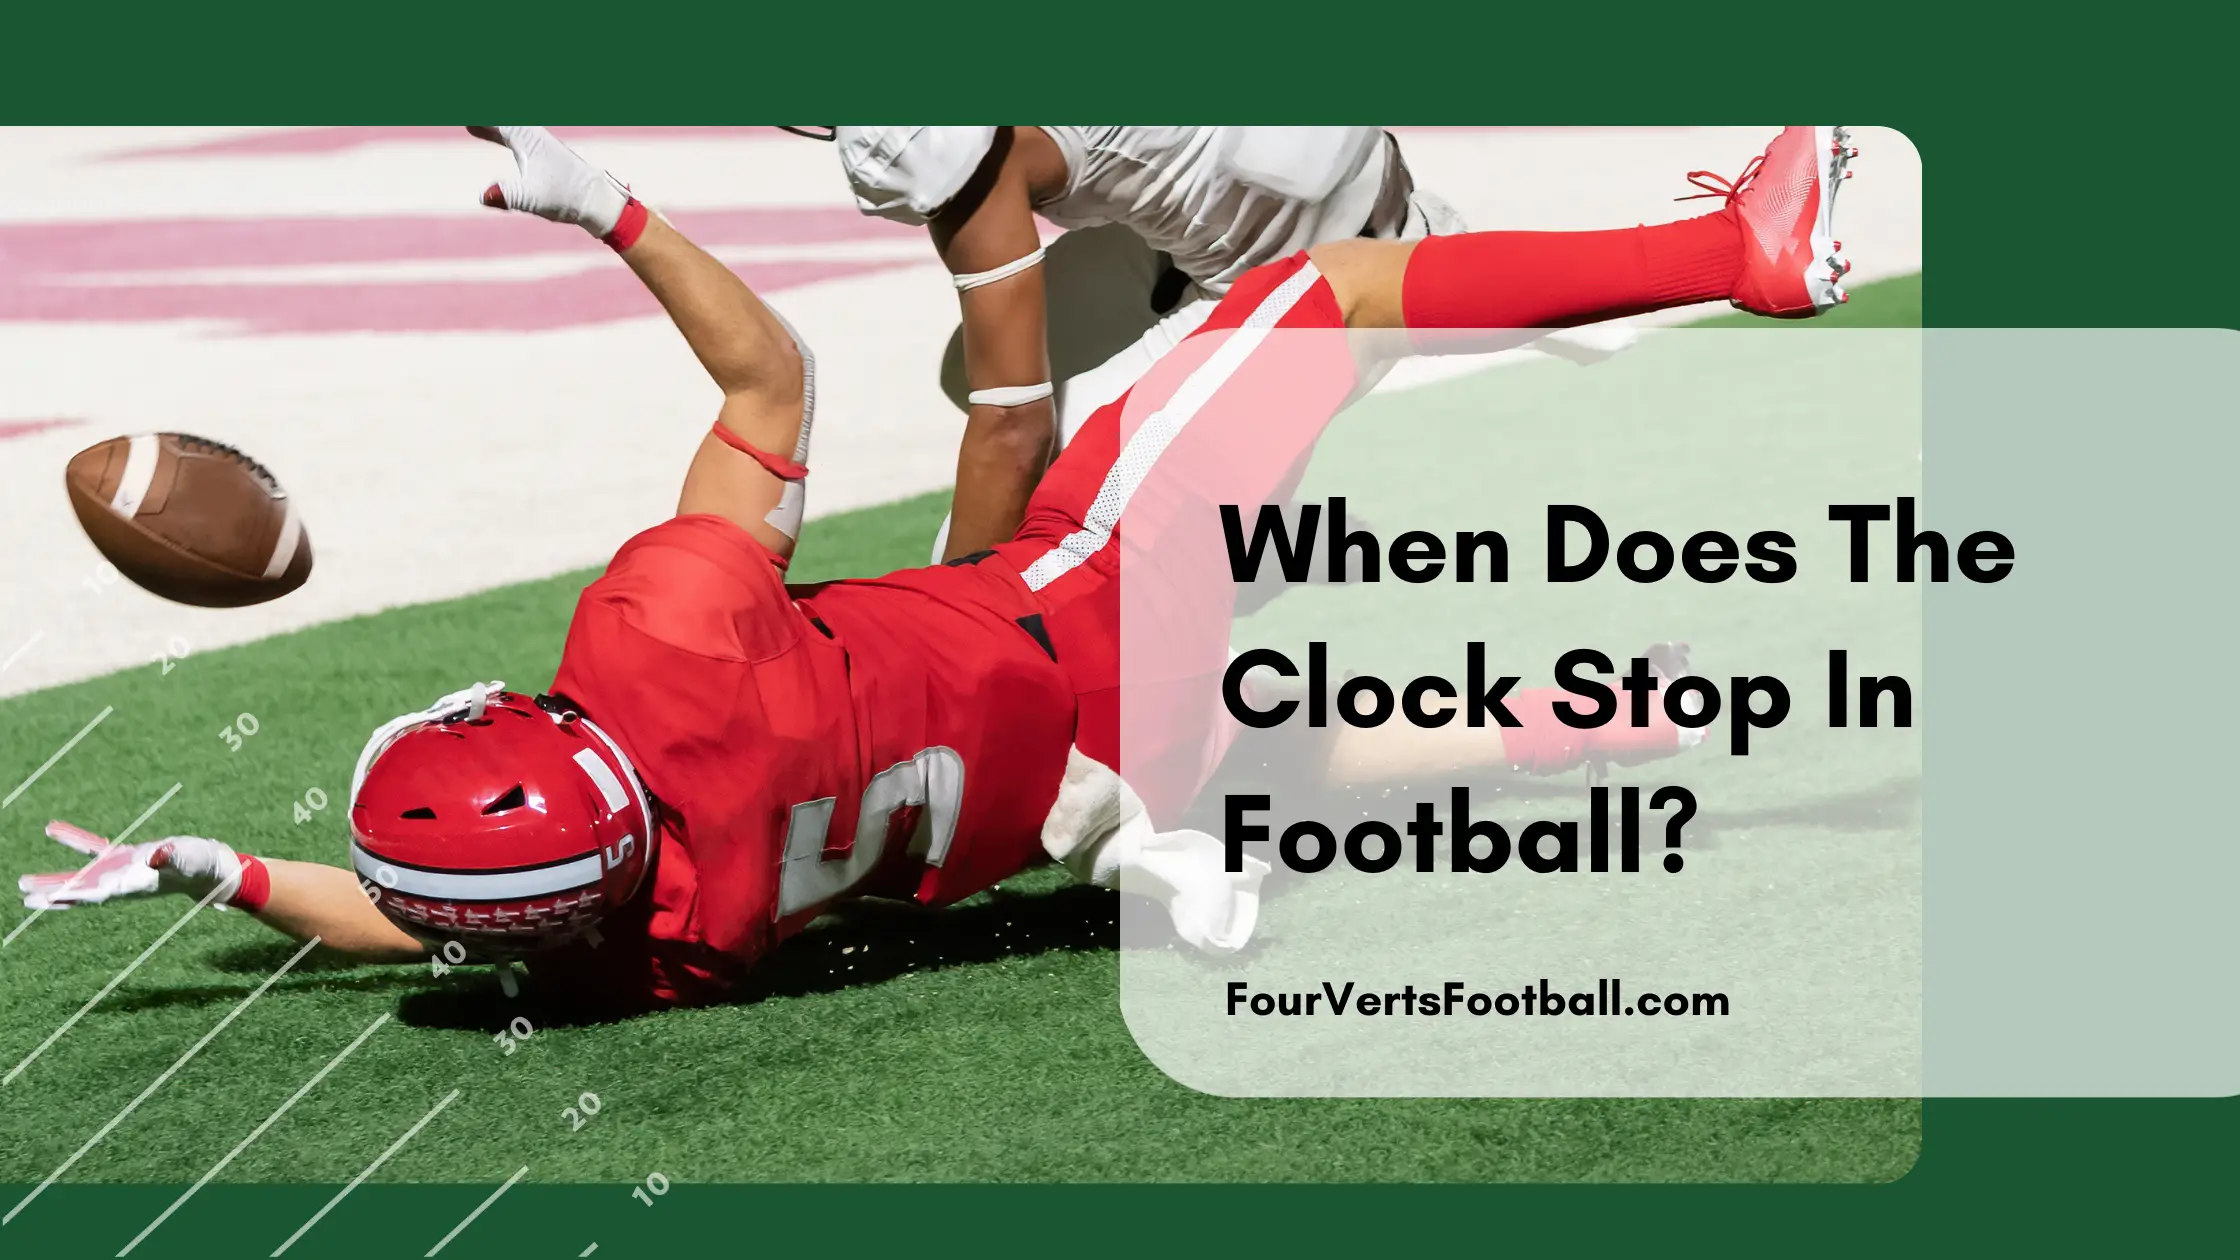 When Does The Clock Stop In Football